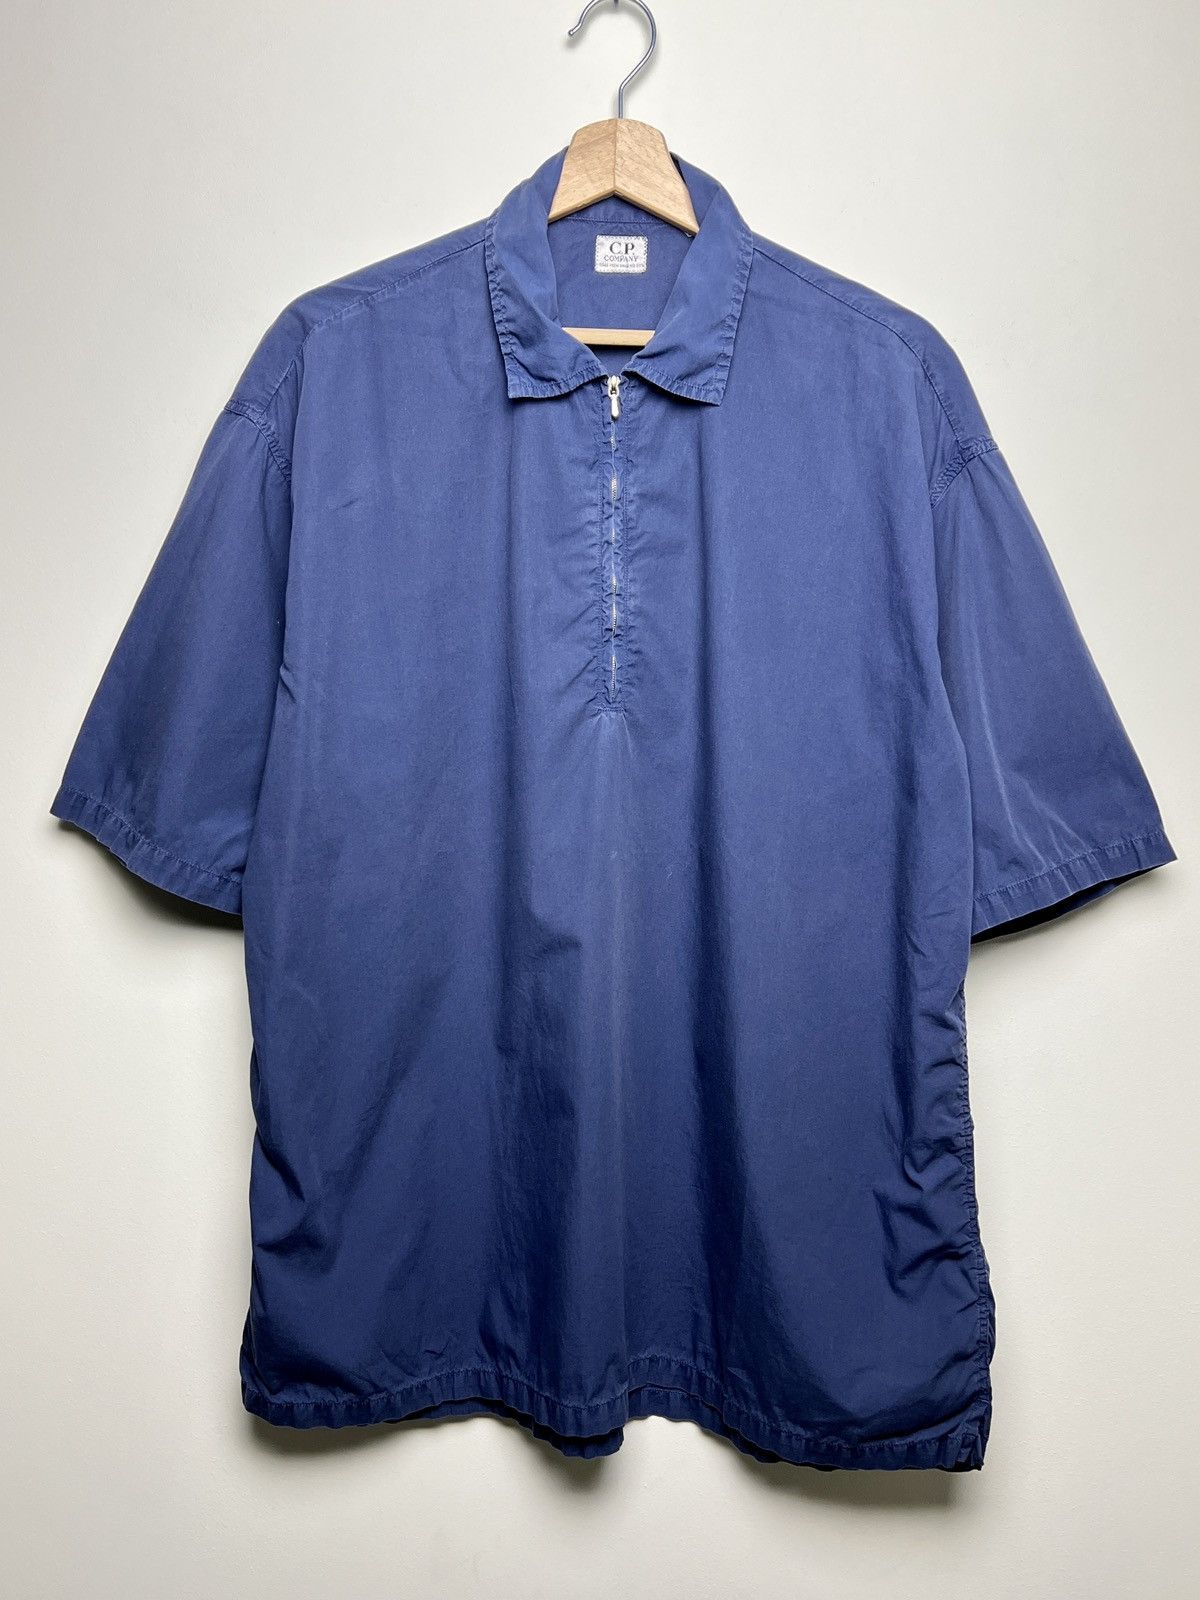 Vintage cp company stone island archive 80s shirt/overshirt | Grailed